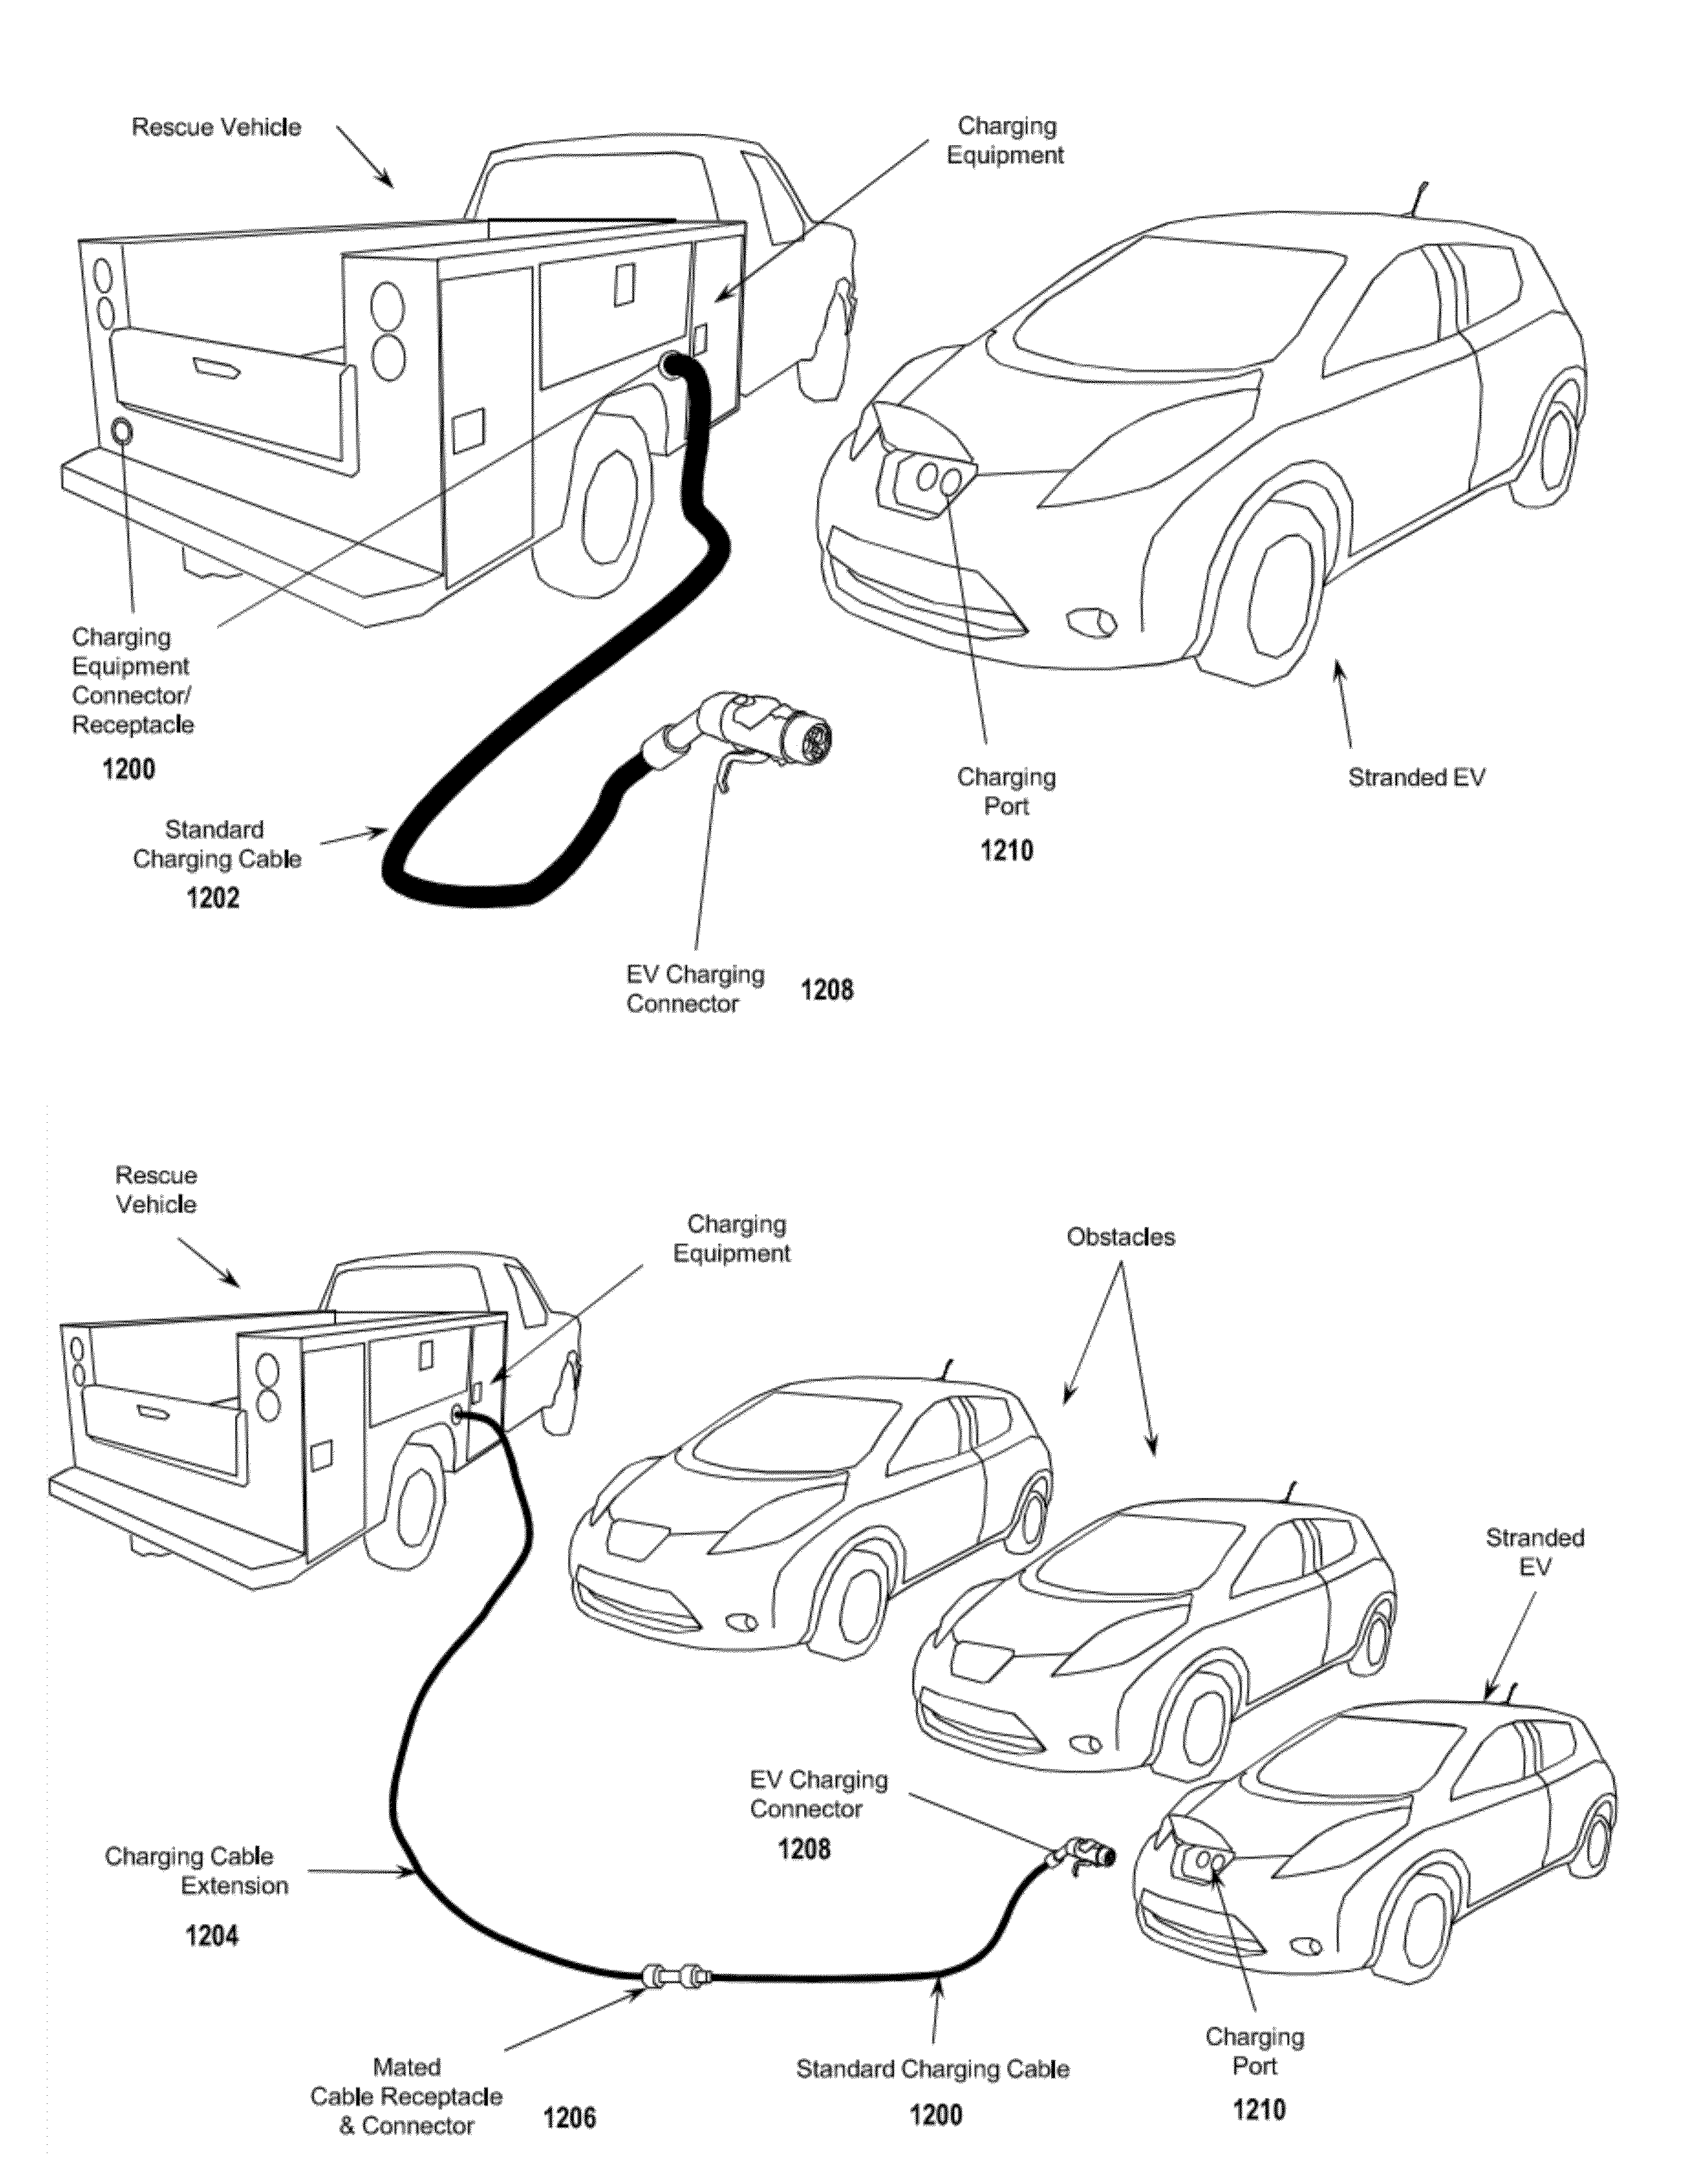 Charging service vehicles and methods using modular batteries